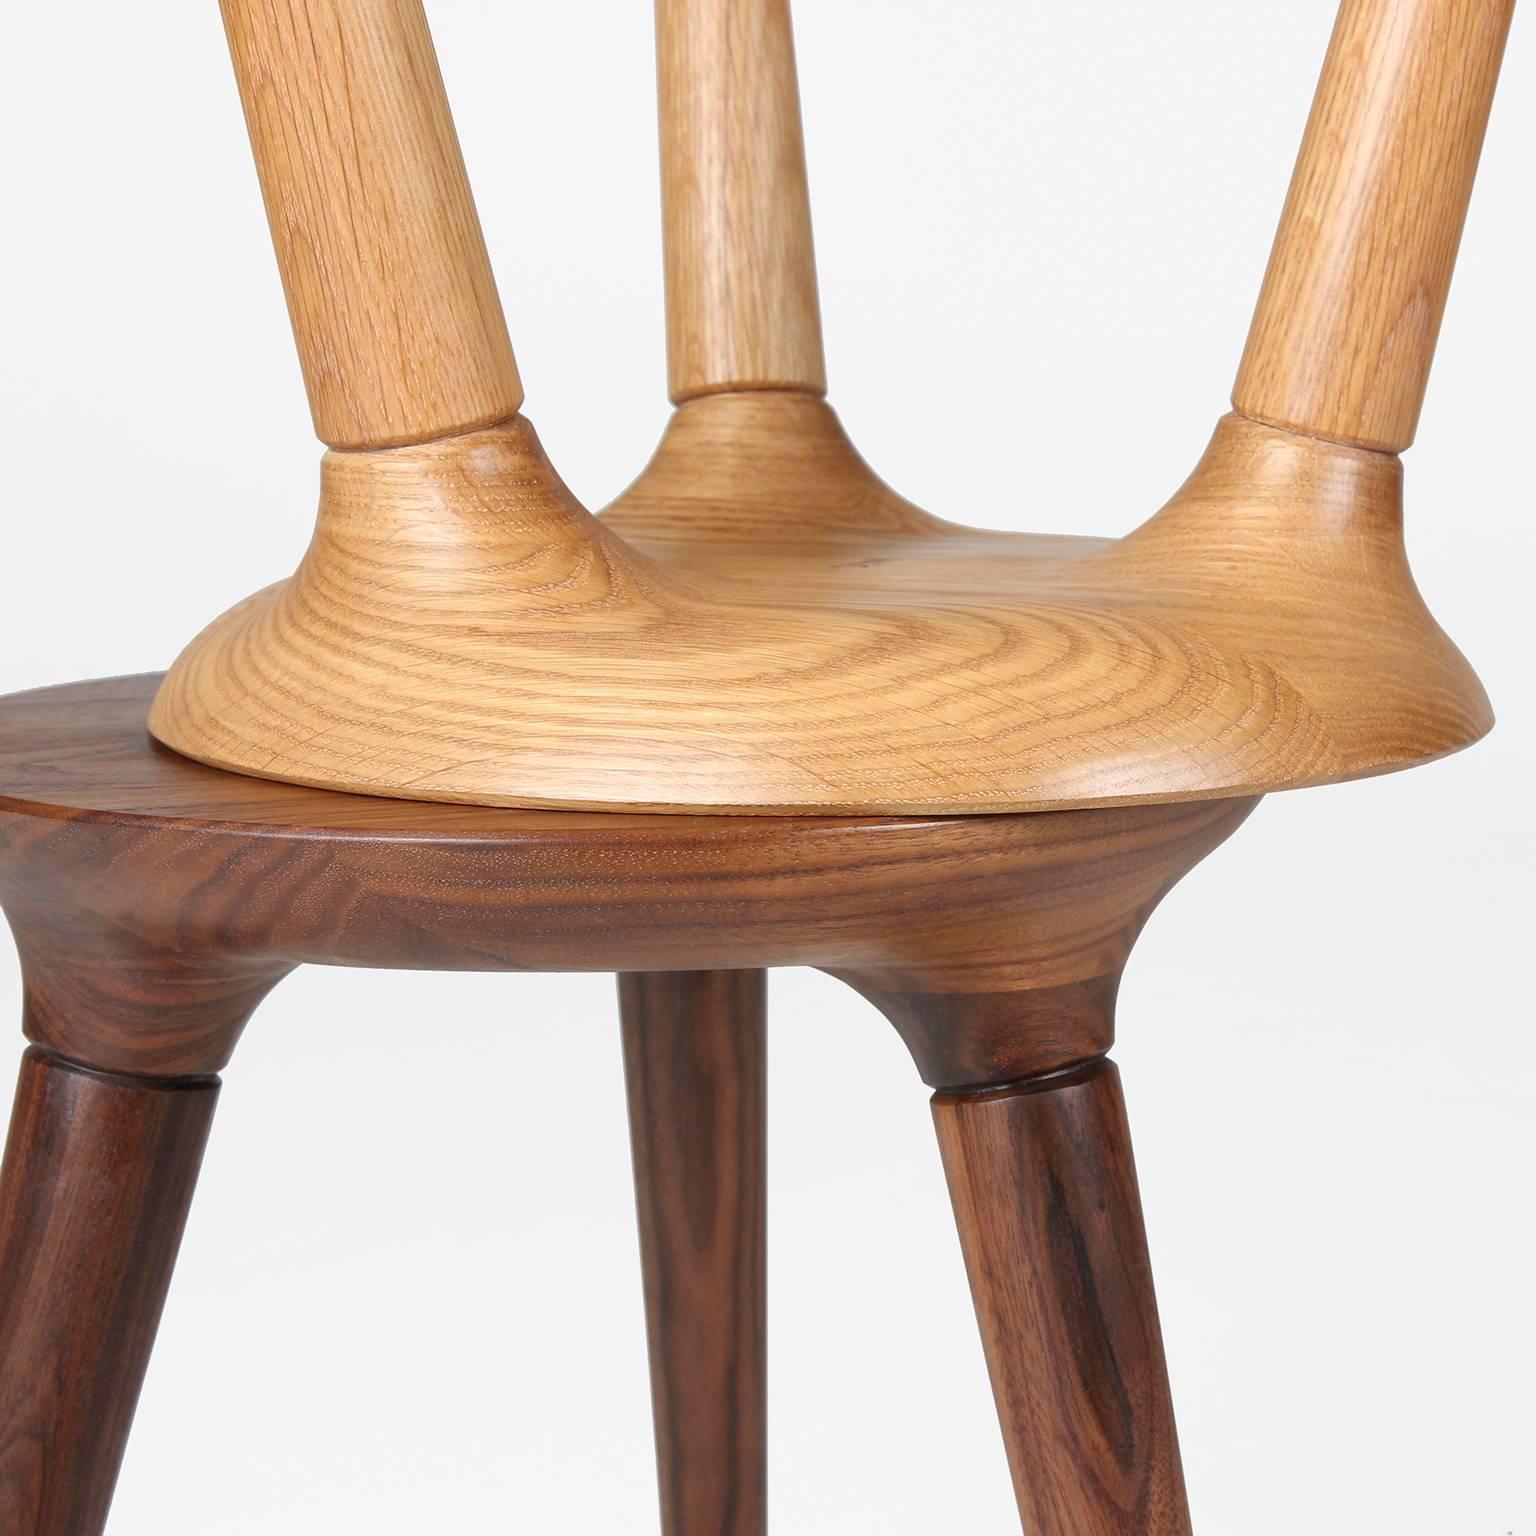 American Coventry Stool with Windsor Joinery in Walnut by Studio Dunn, Made to Order